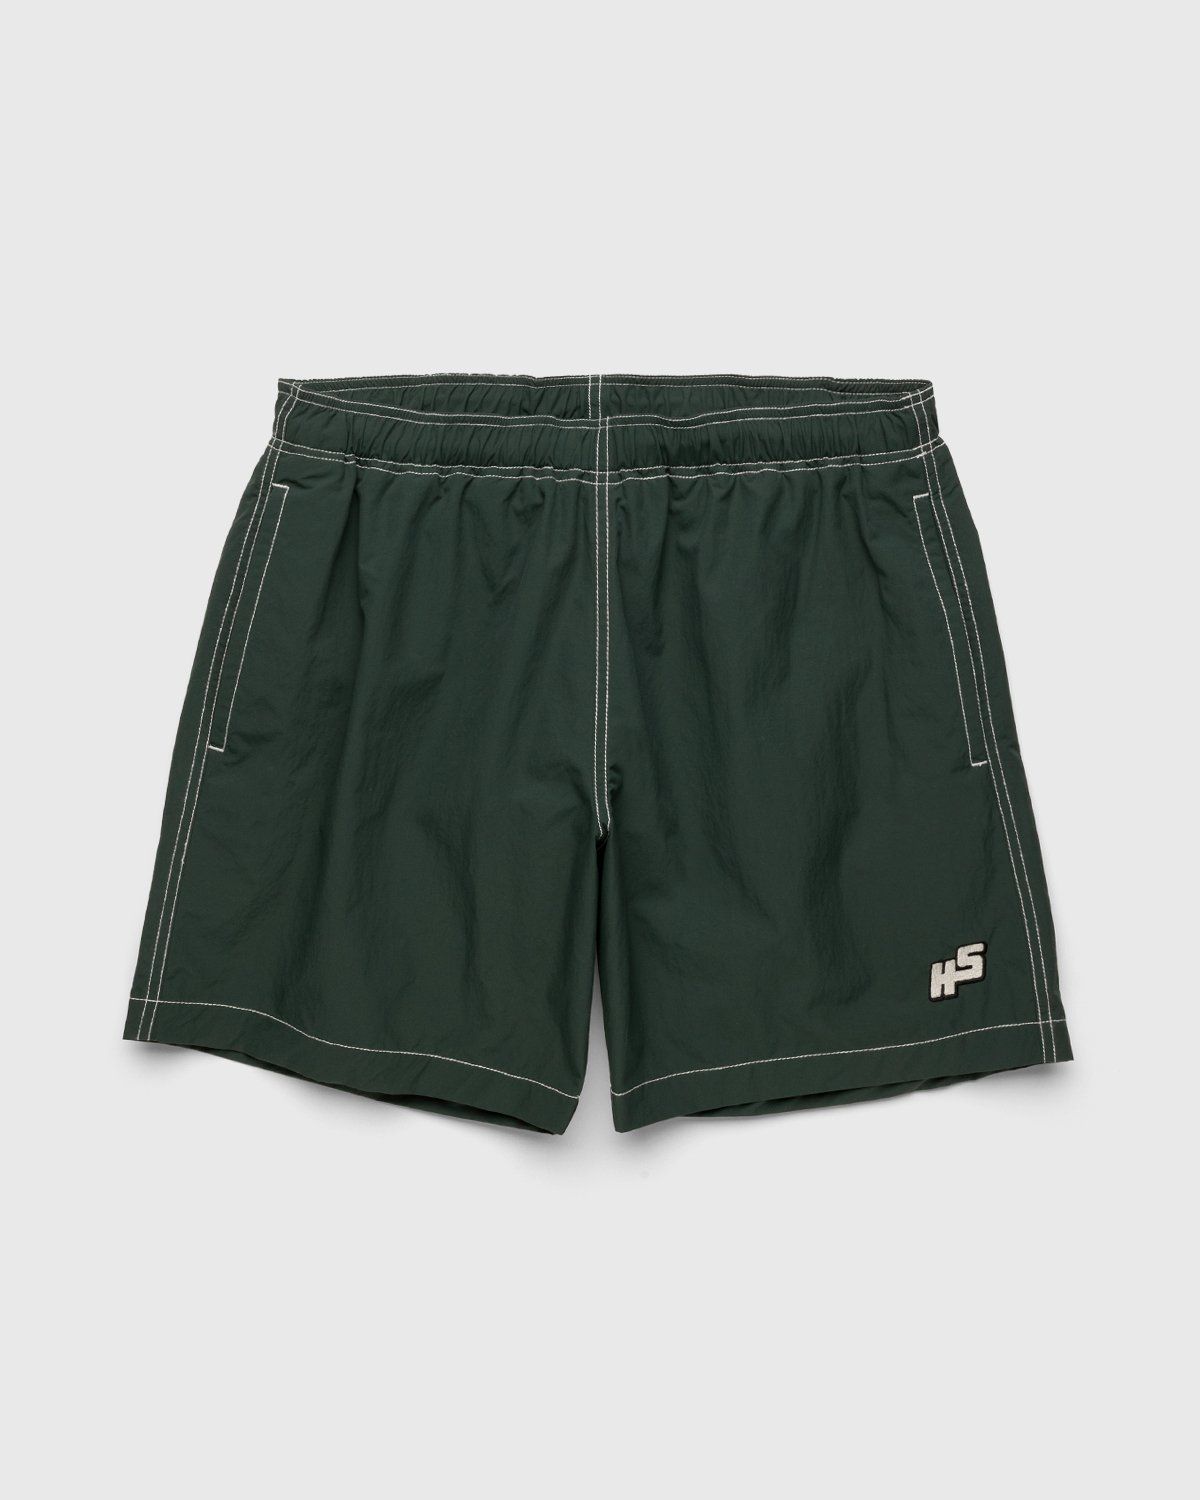 Highsnobiety – Contrast Brushed Nylon Water Shorts Green - Active Shorts - Green - Image 1